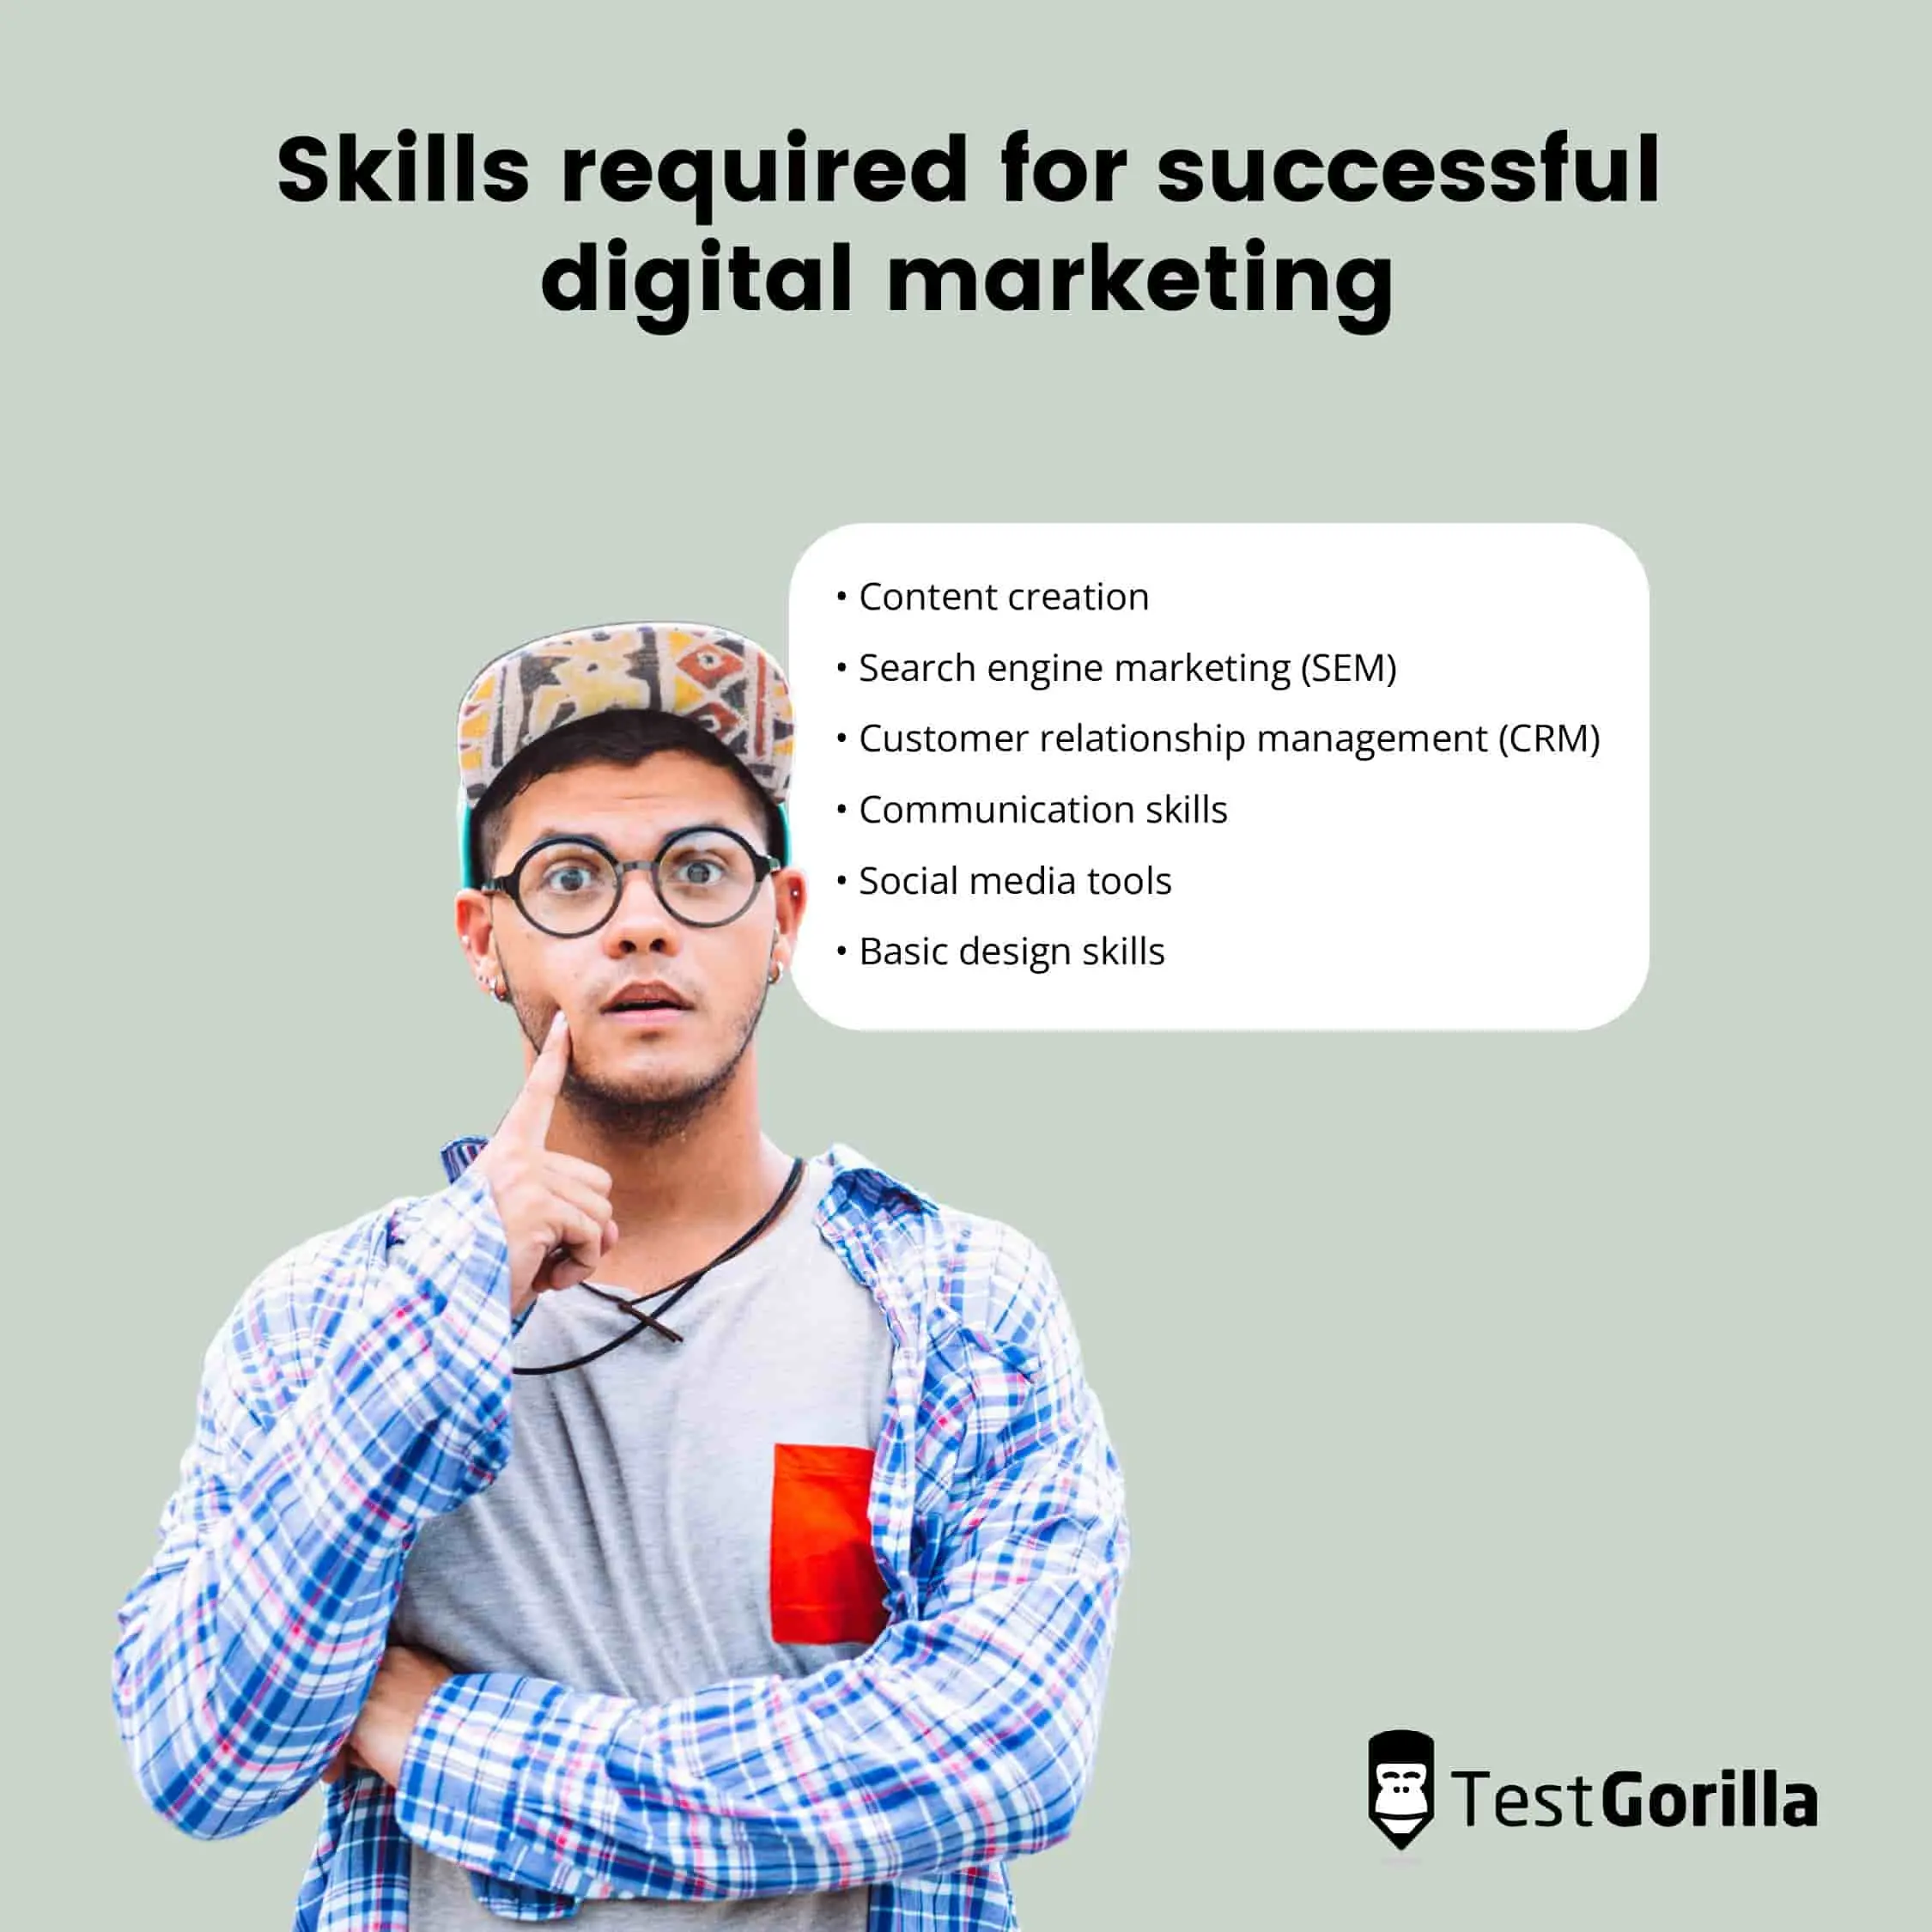 Other skills required for successful digital marketing